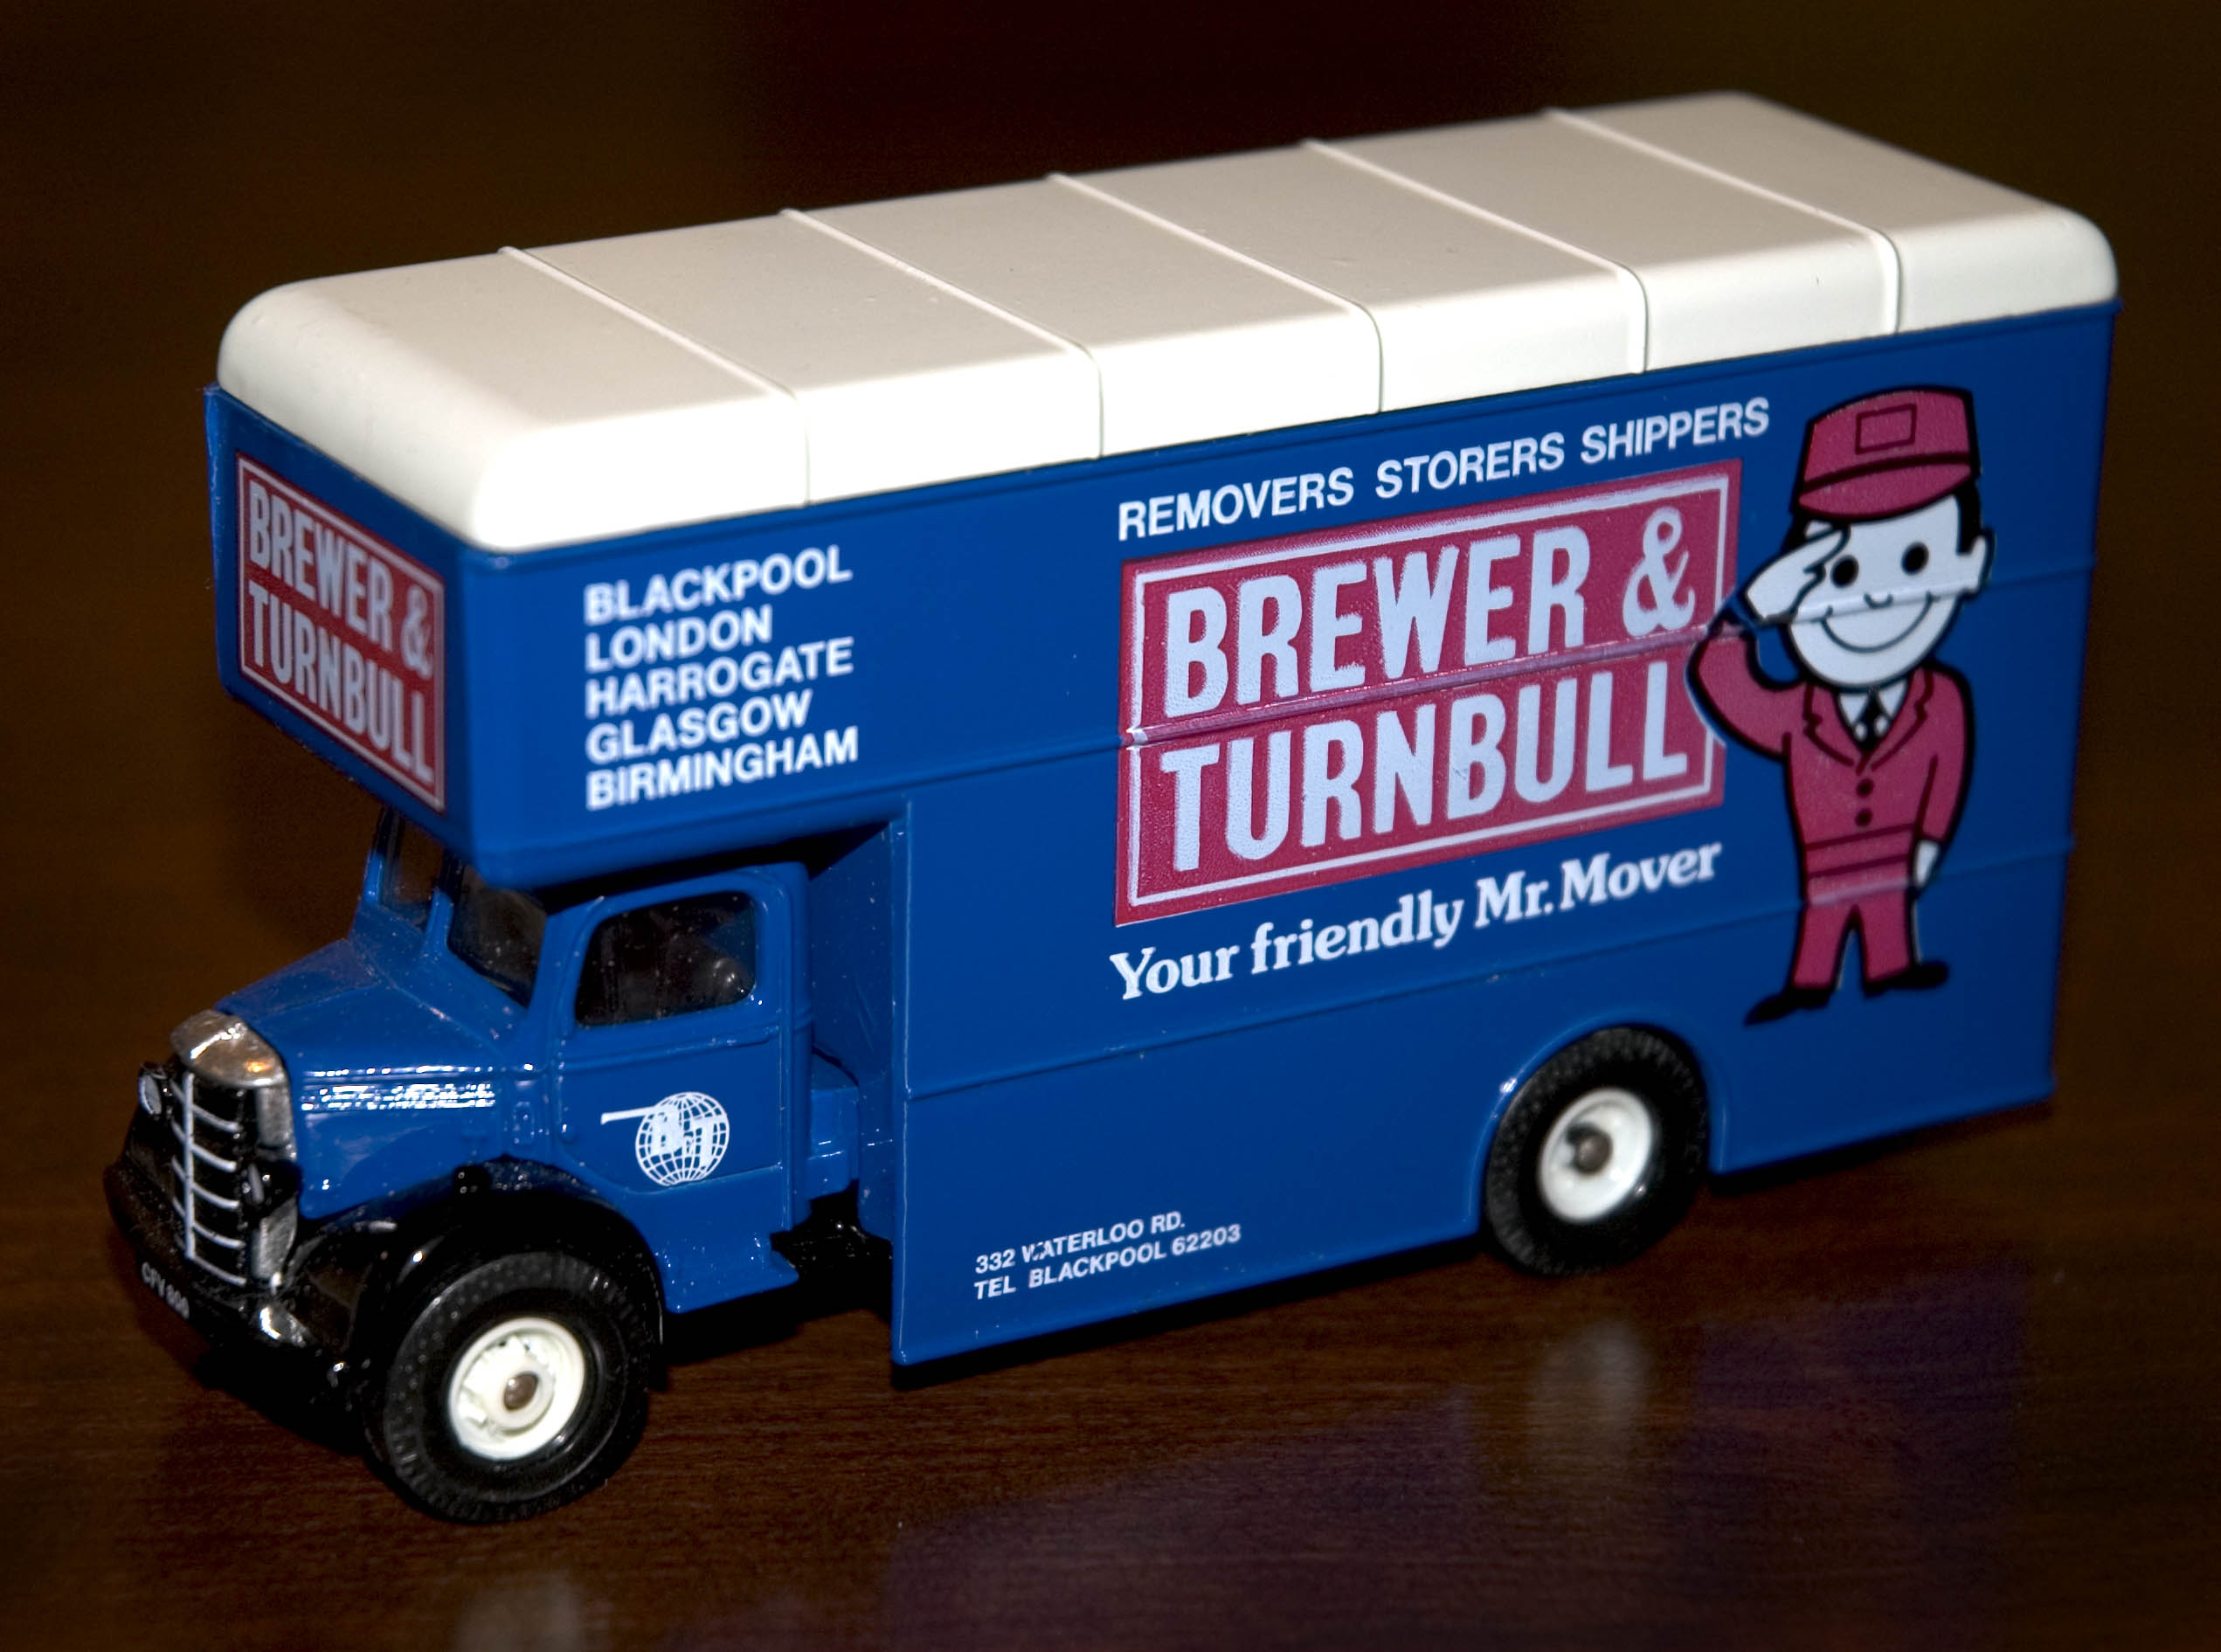 Brewer and Turnbull Movers Van